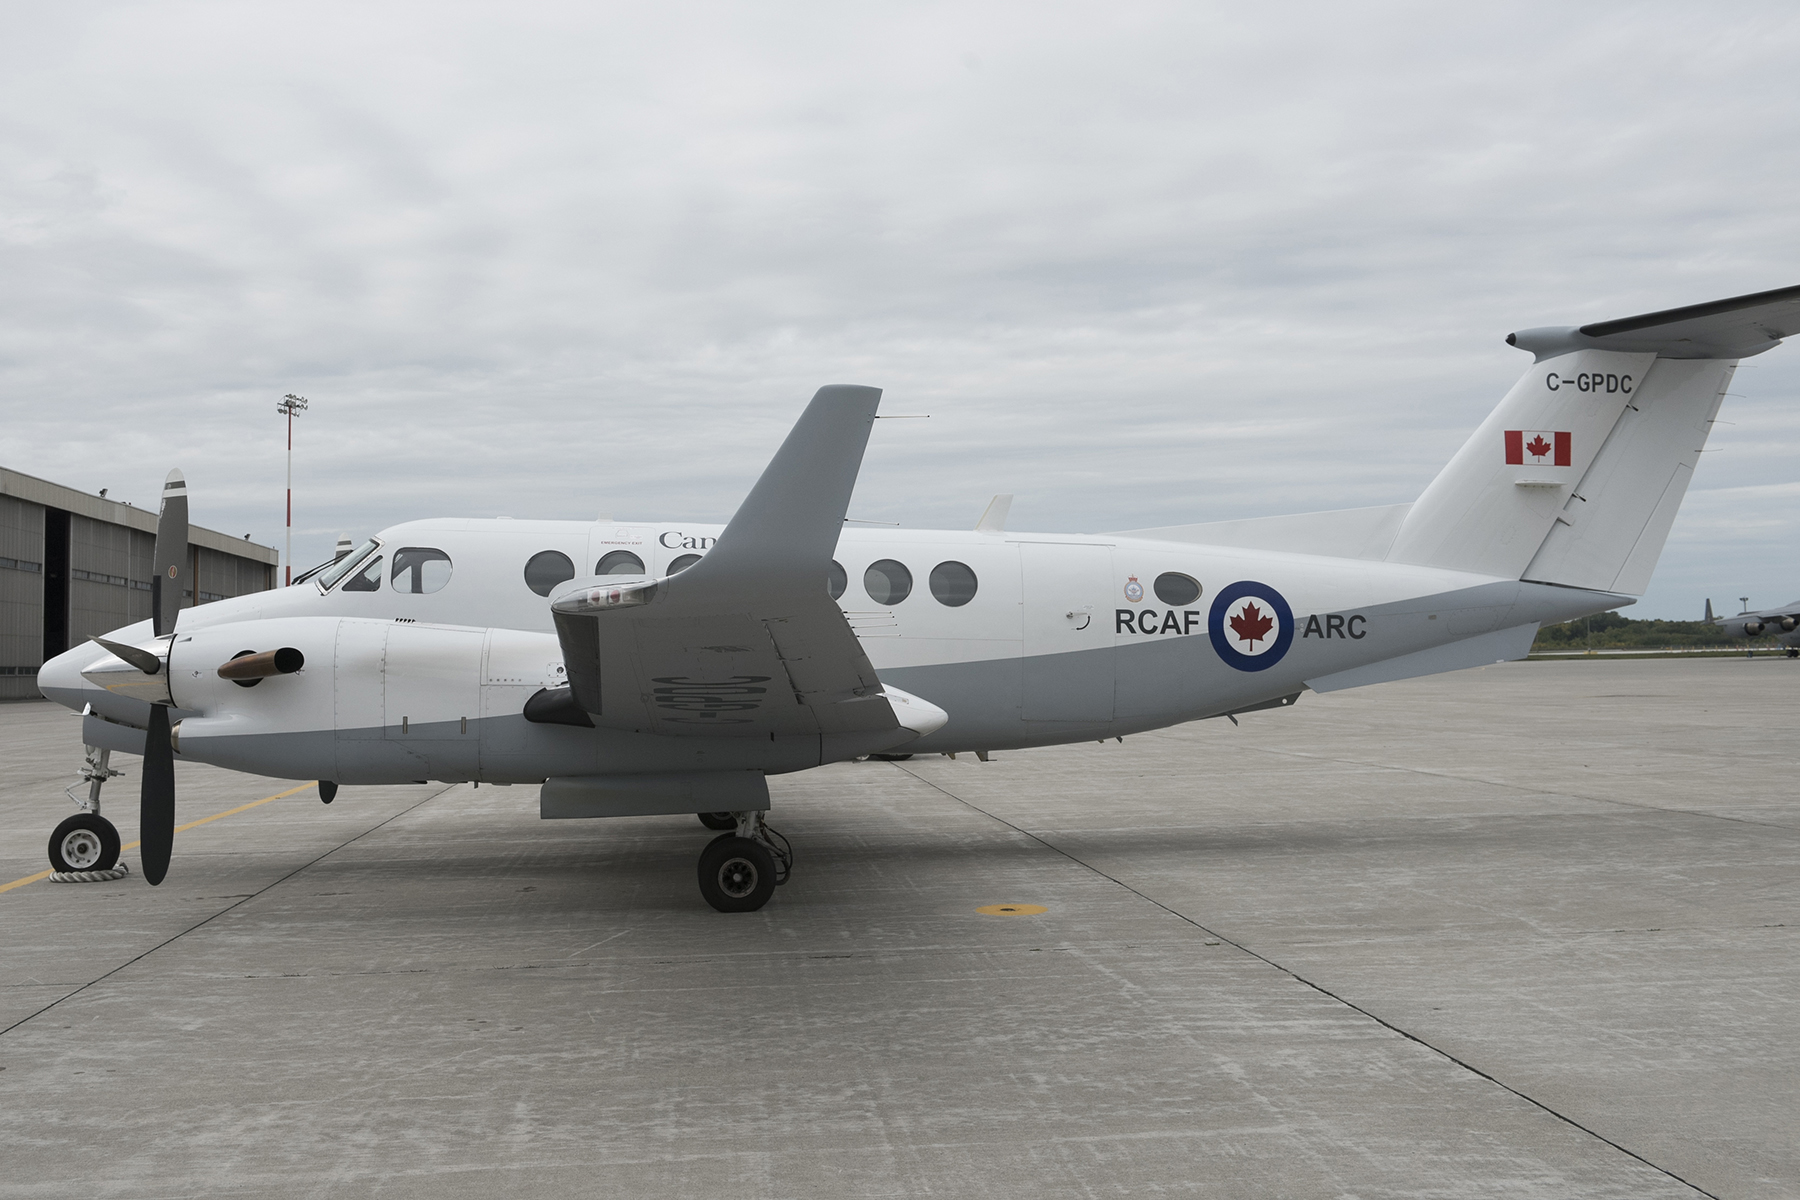 A “new look” for RCAF aircraft - News Article - Royal Canadian Air Force -  Canada.ca